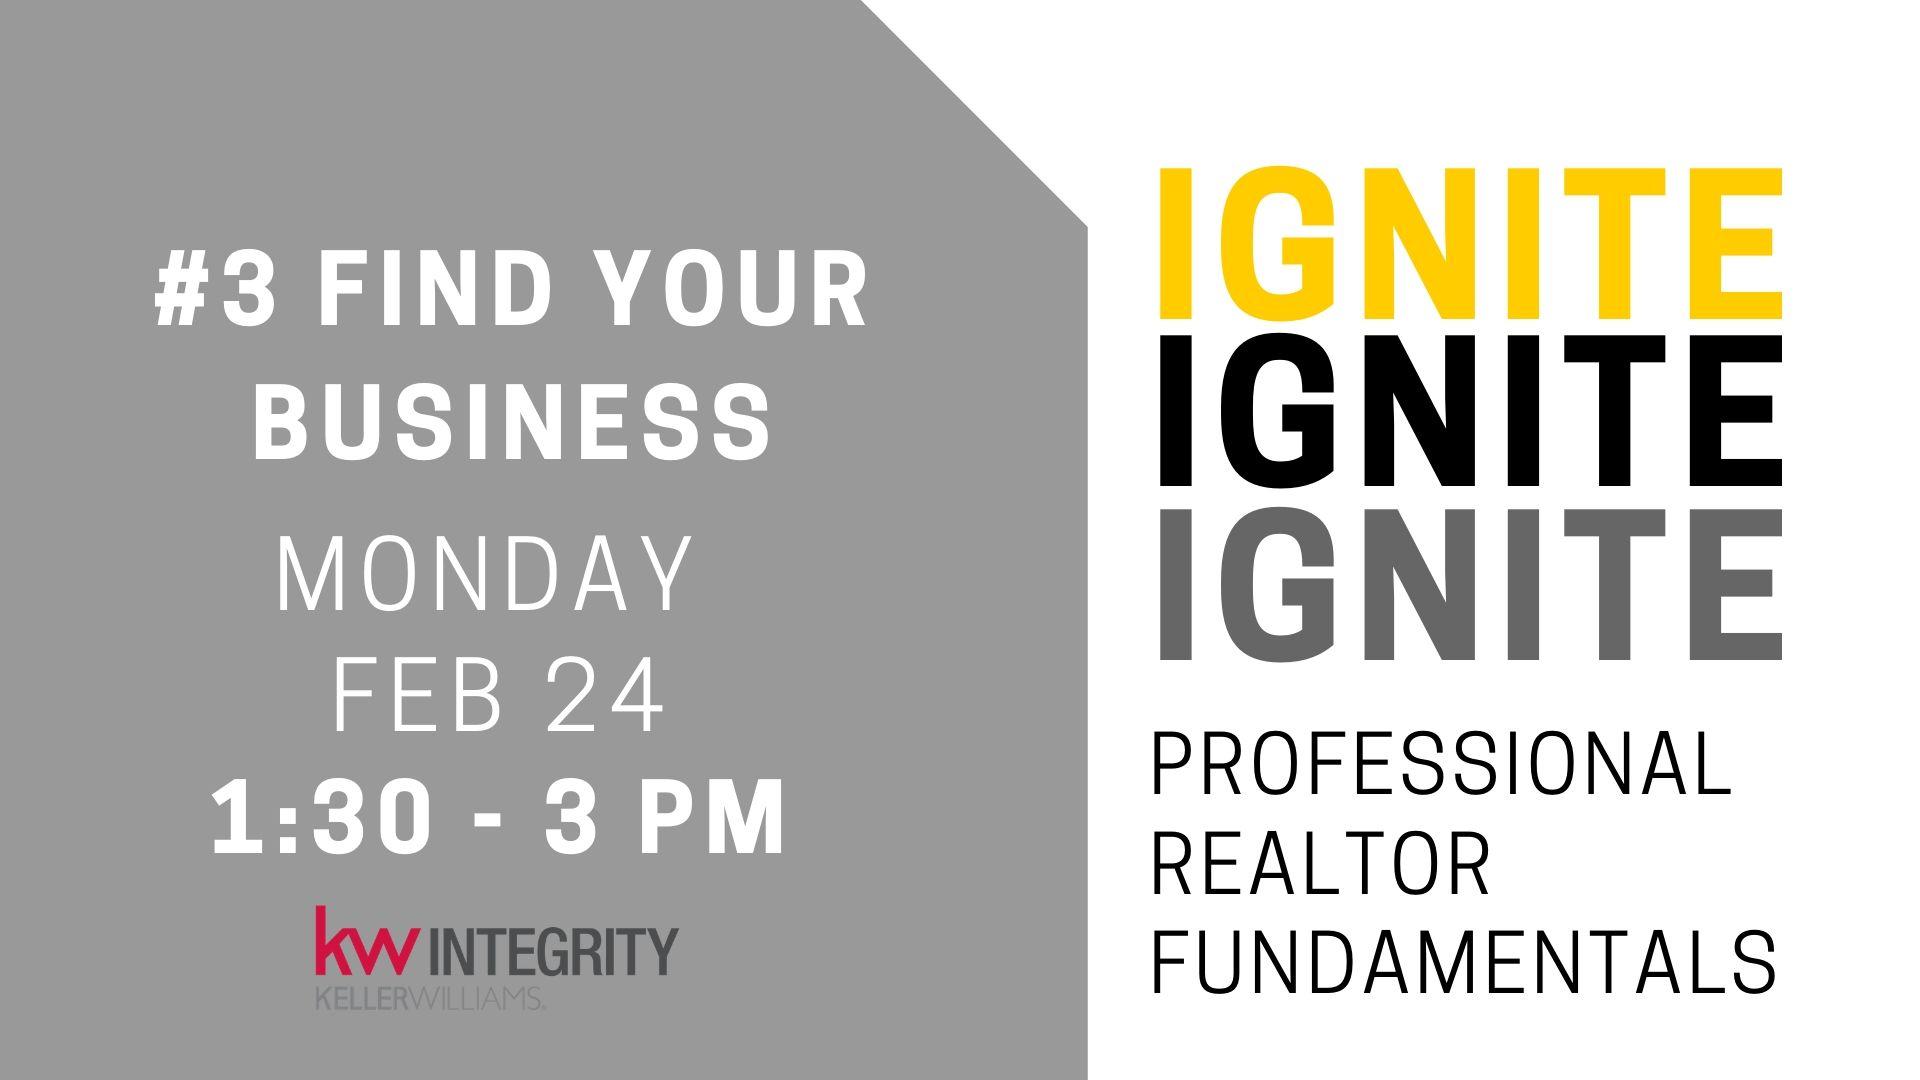 IGNITE: Find Your Business